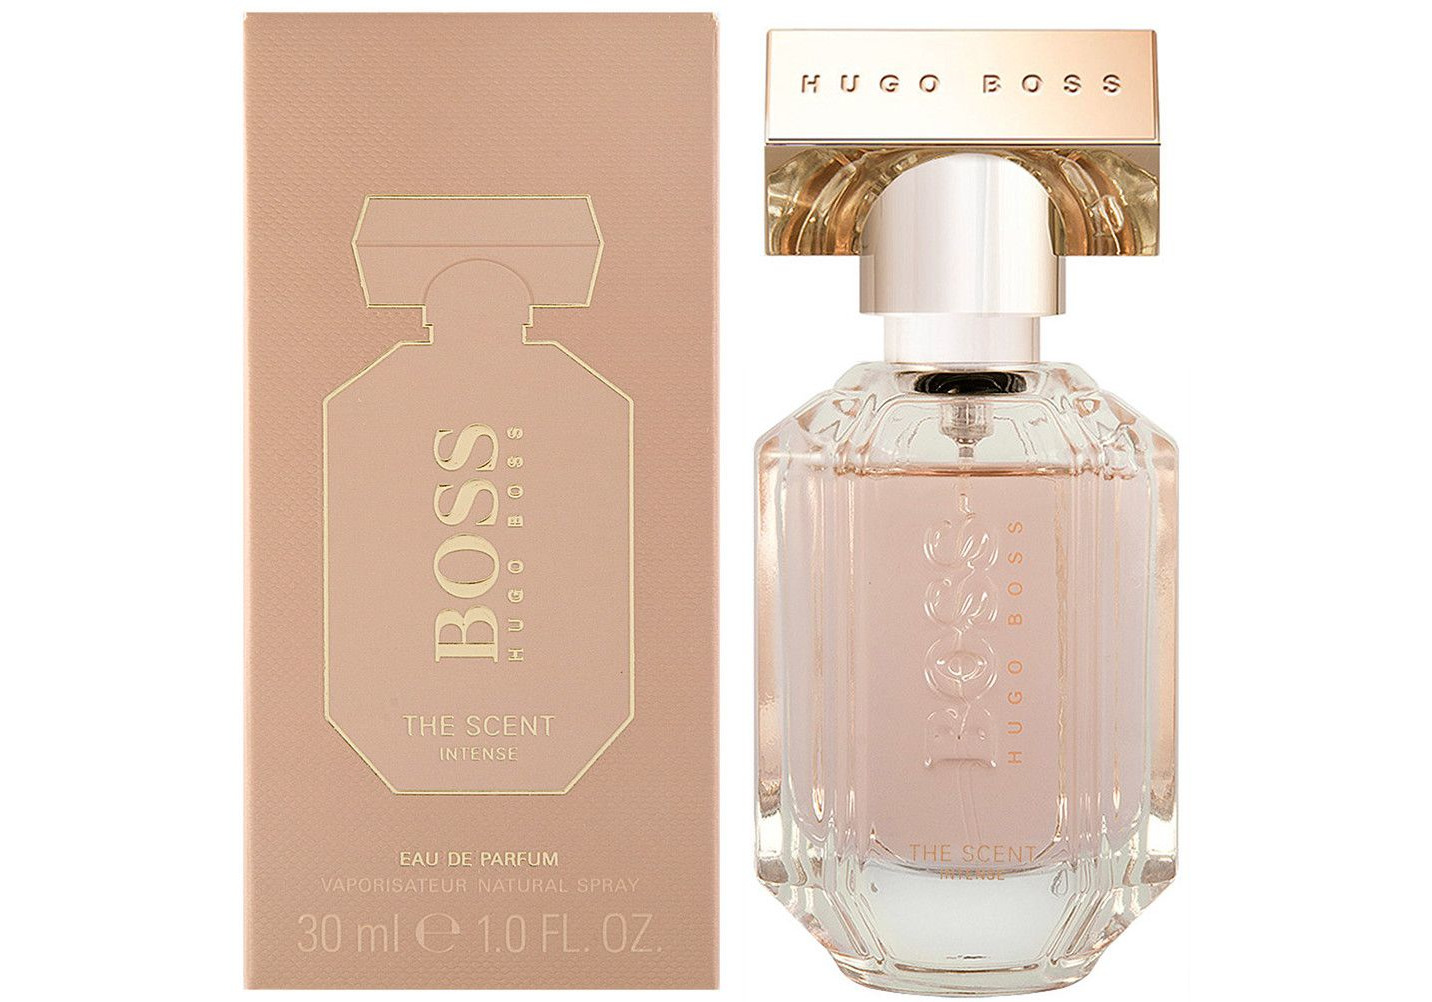 Хуго босс сент. Boss the Scent for her Hugo Boss. Хьюго босс the Scent женские. Hugo Boss the Scent for her intense. Hugo Boss the Scent for her Eau de Parfum.